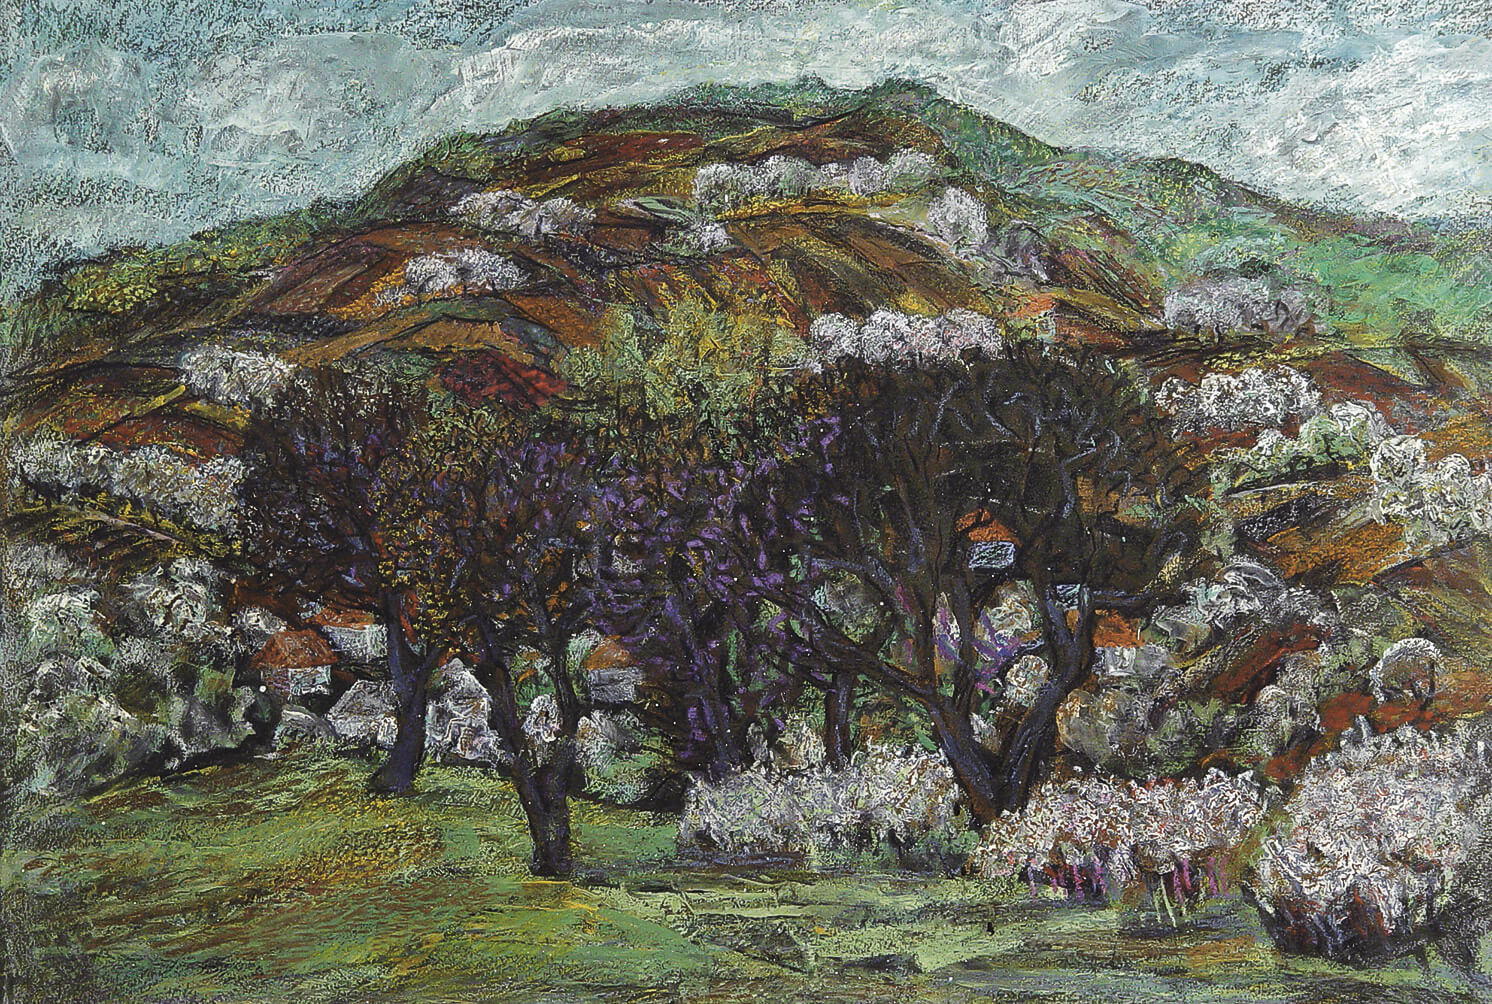 Dolna. The Outskirts of the Village. Painting by Vasile Cojocaru